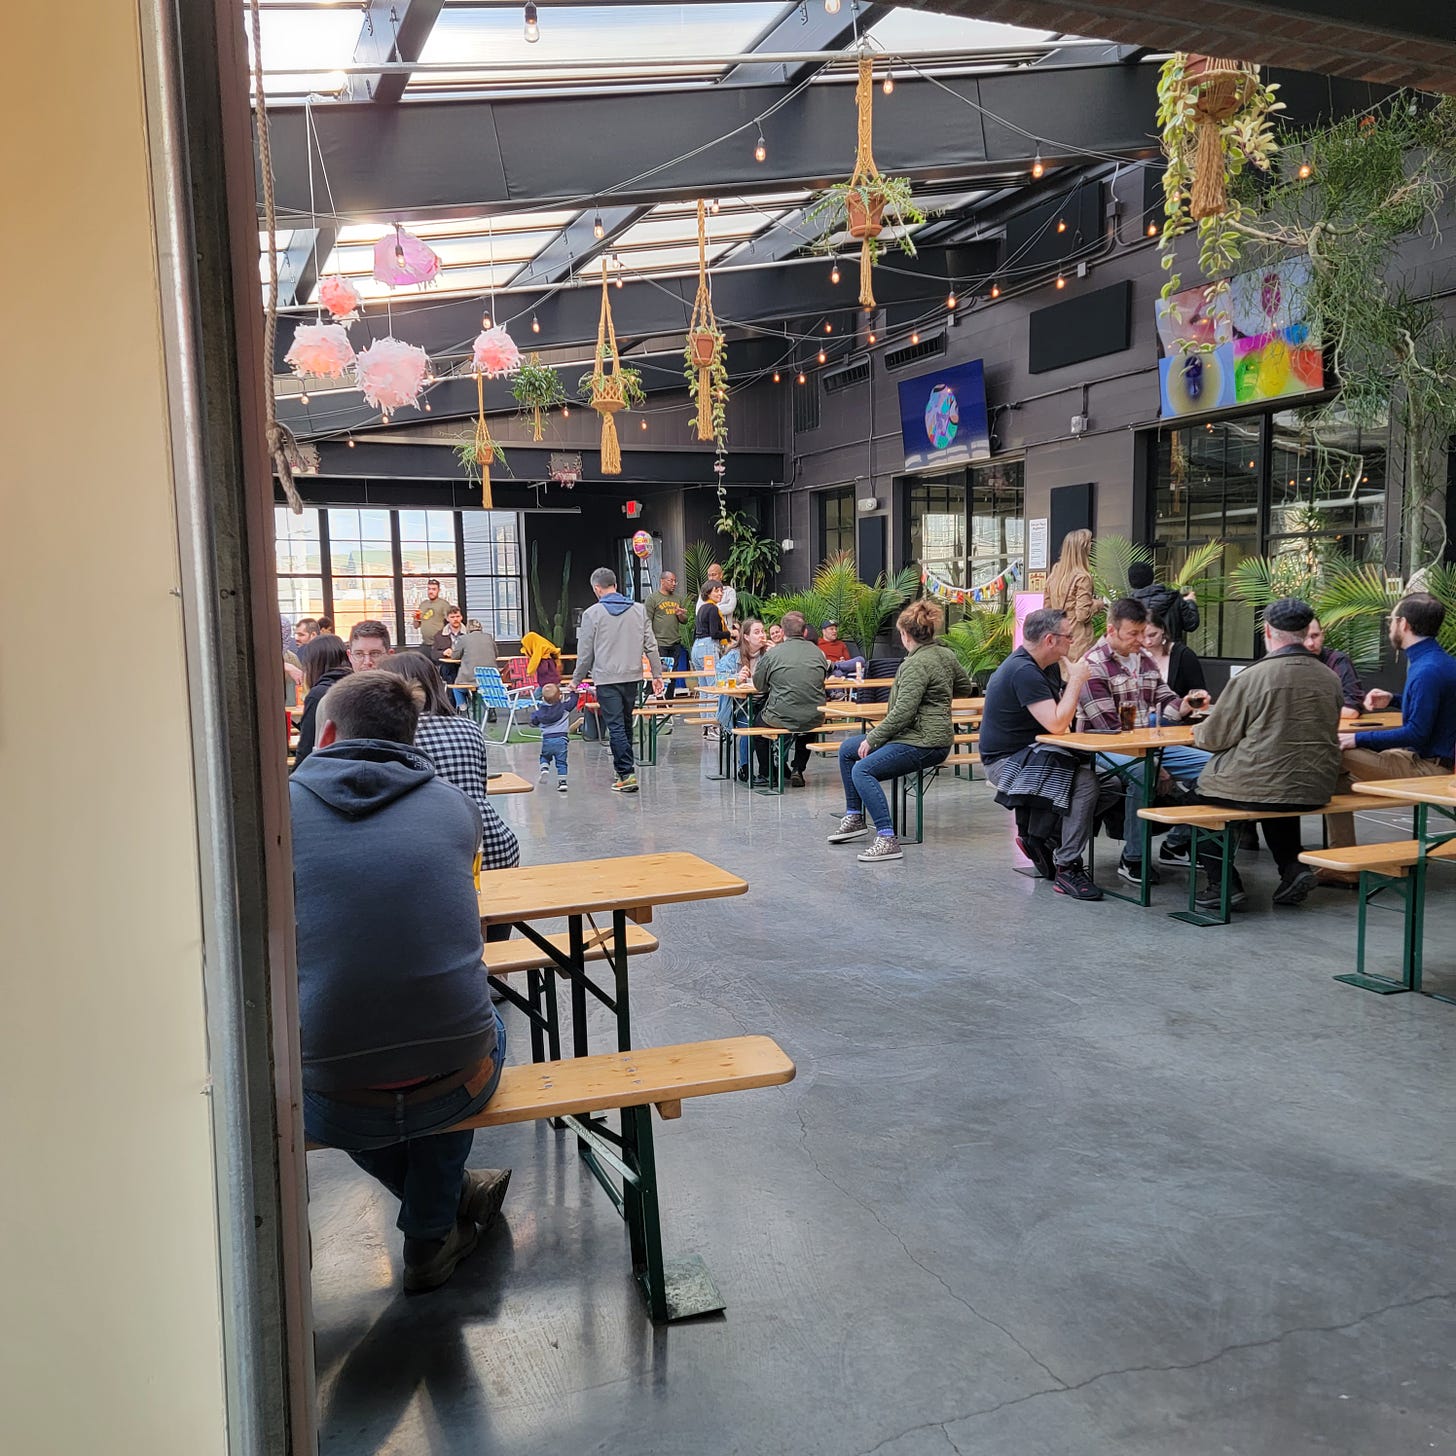 Indoor beer garden-style space, filled with sunlight, hanging plants, and art